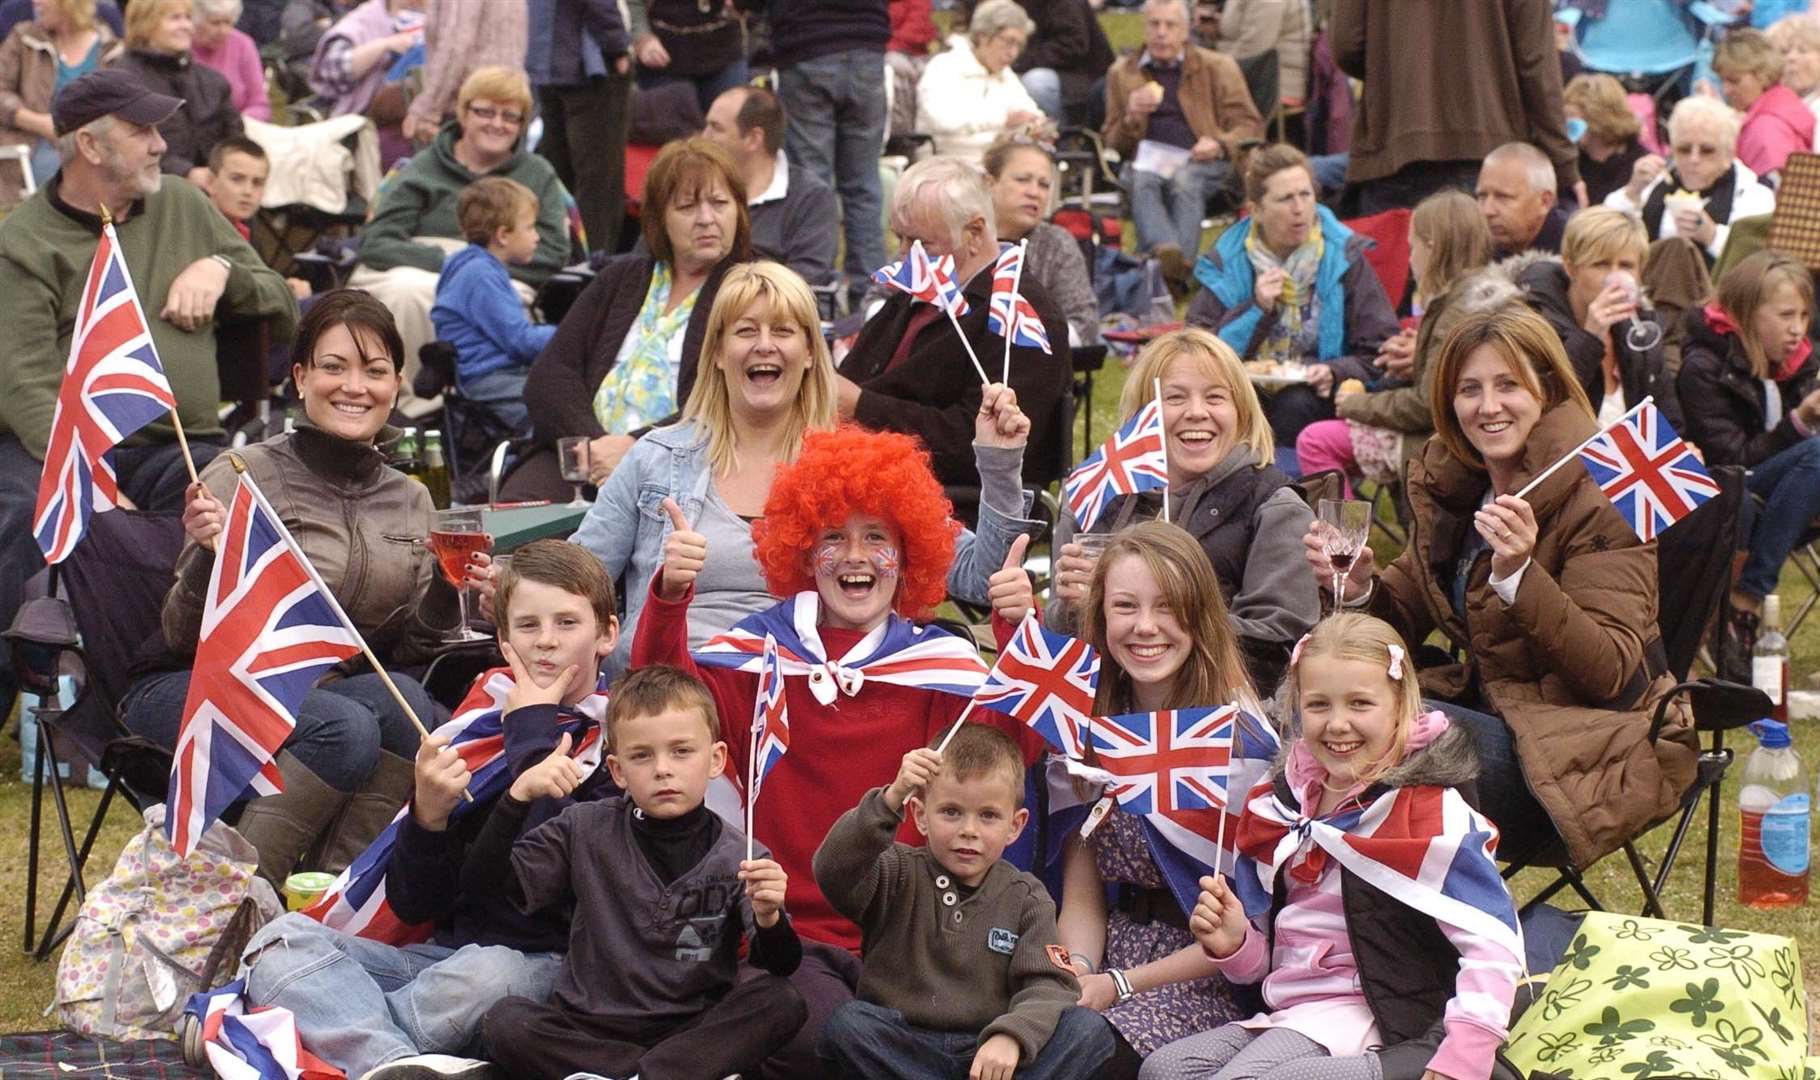 Families gather at Proms in the Park